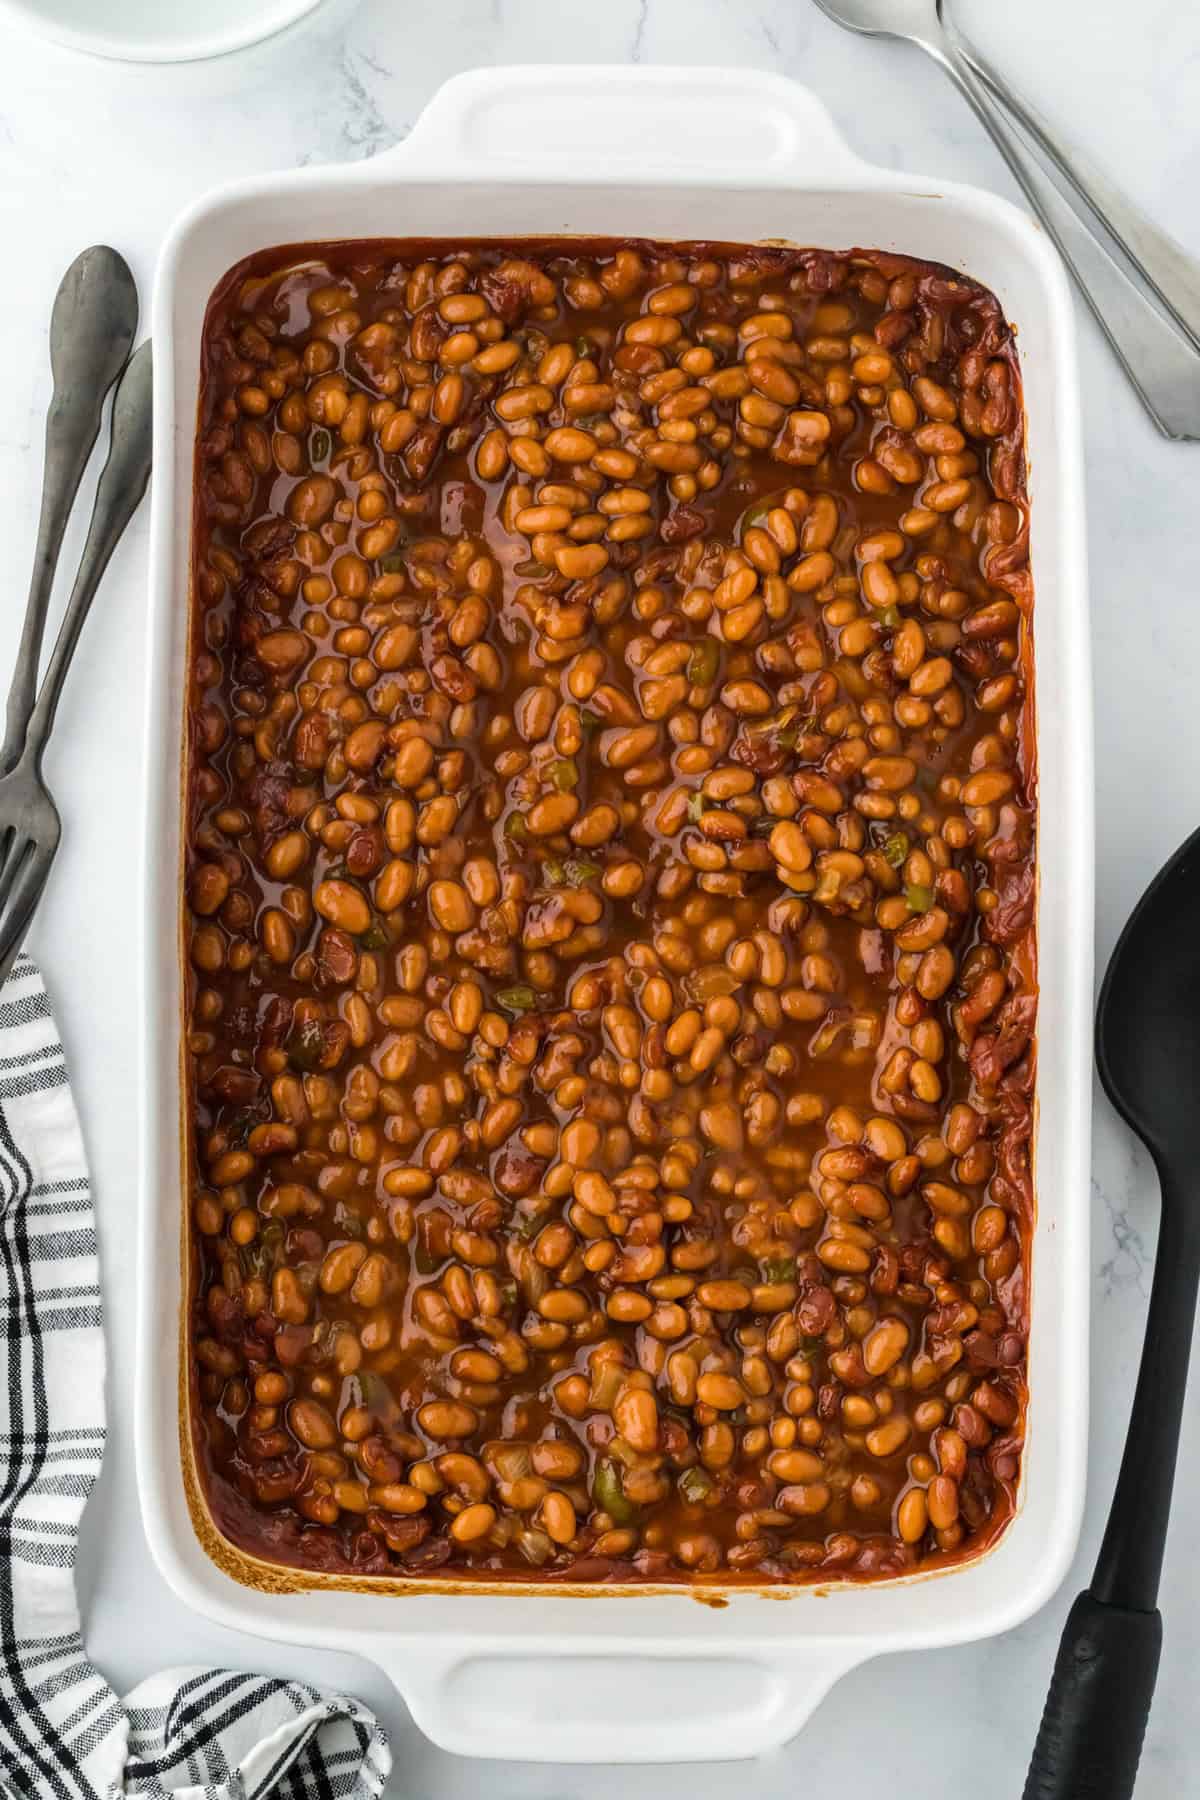 A large dish of homemade baked beans recipe in a white casserole dish on a white background with a black spoon on the side